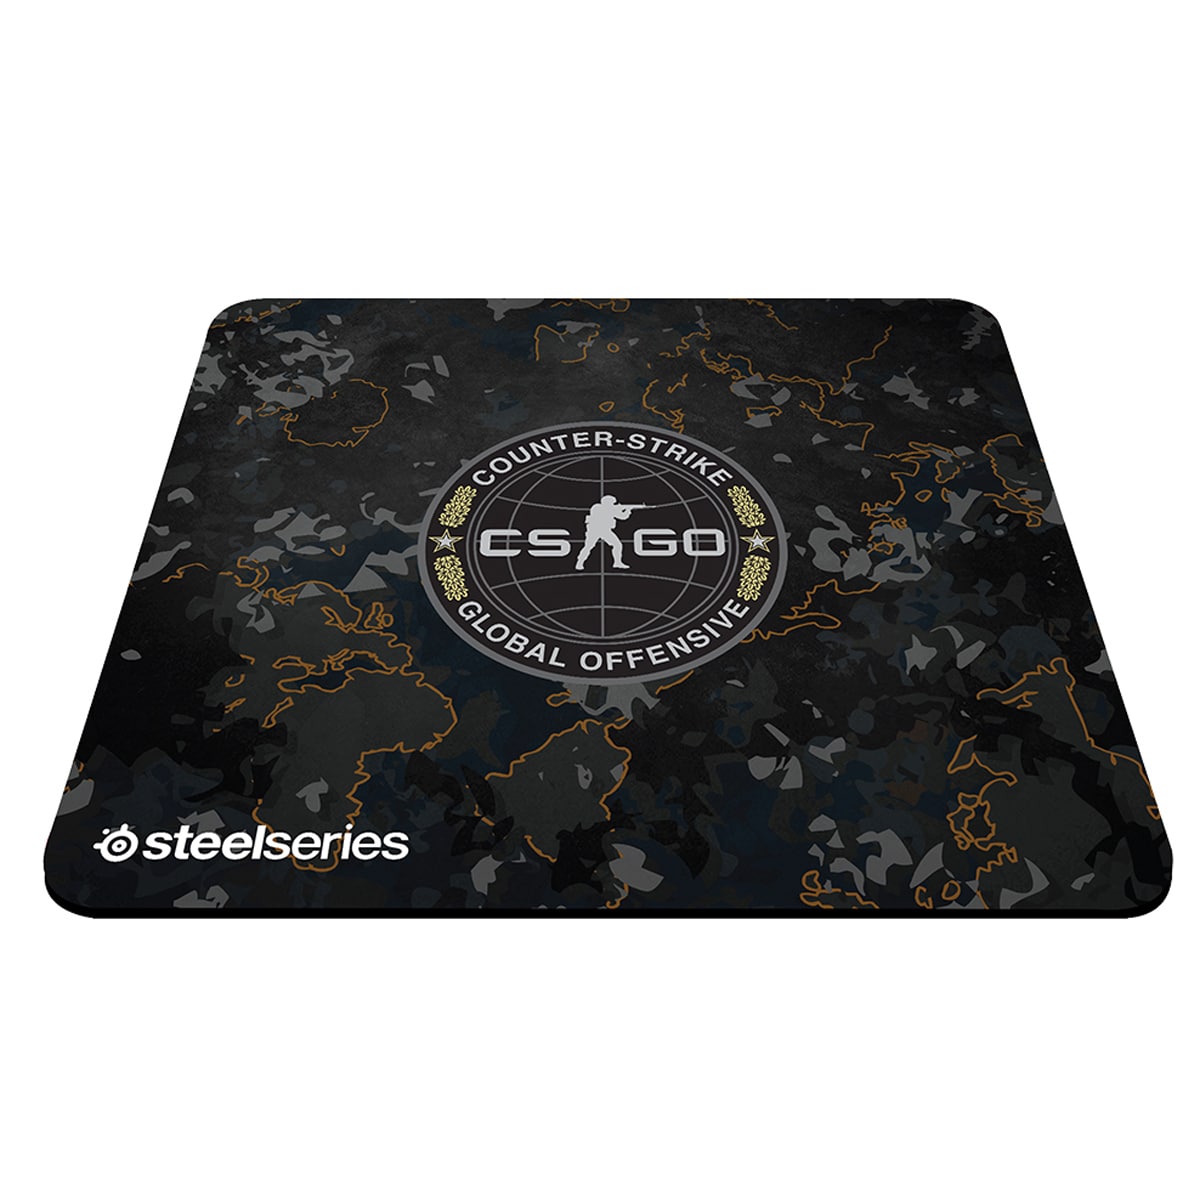 Steelseries Heavy CS GO Large Mouse Pad 45*40cm (First Copy)   |  Computer Accessories  |  Mouse Pads  |